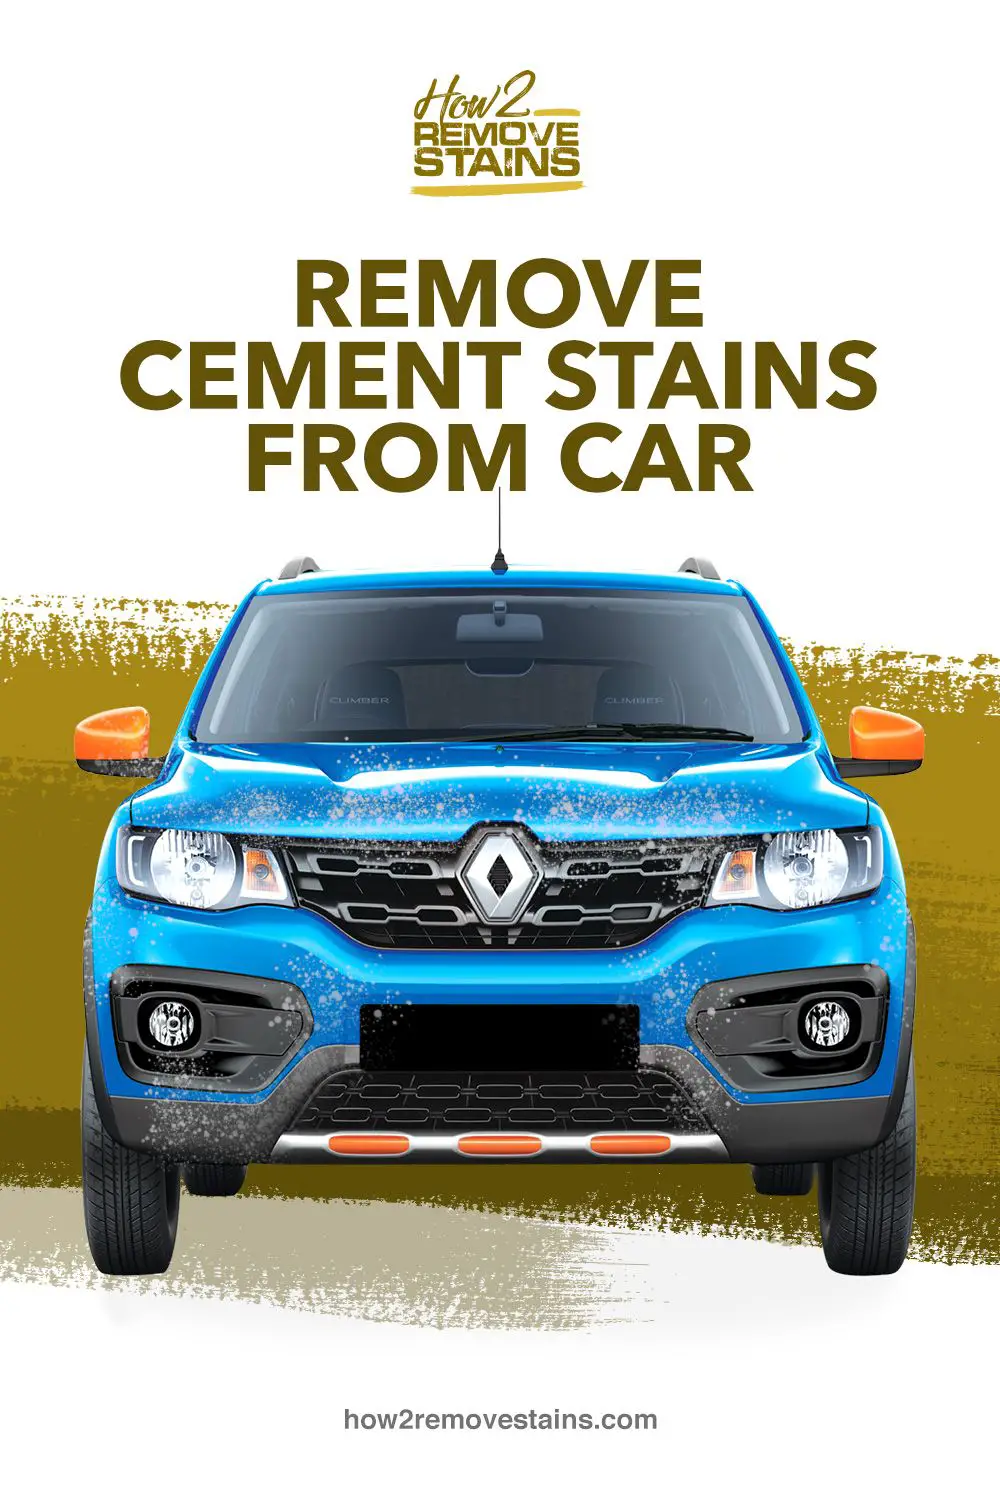 How to remove cement stains from car